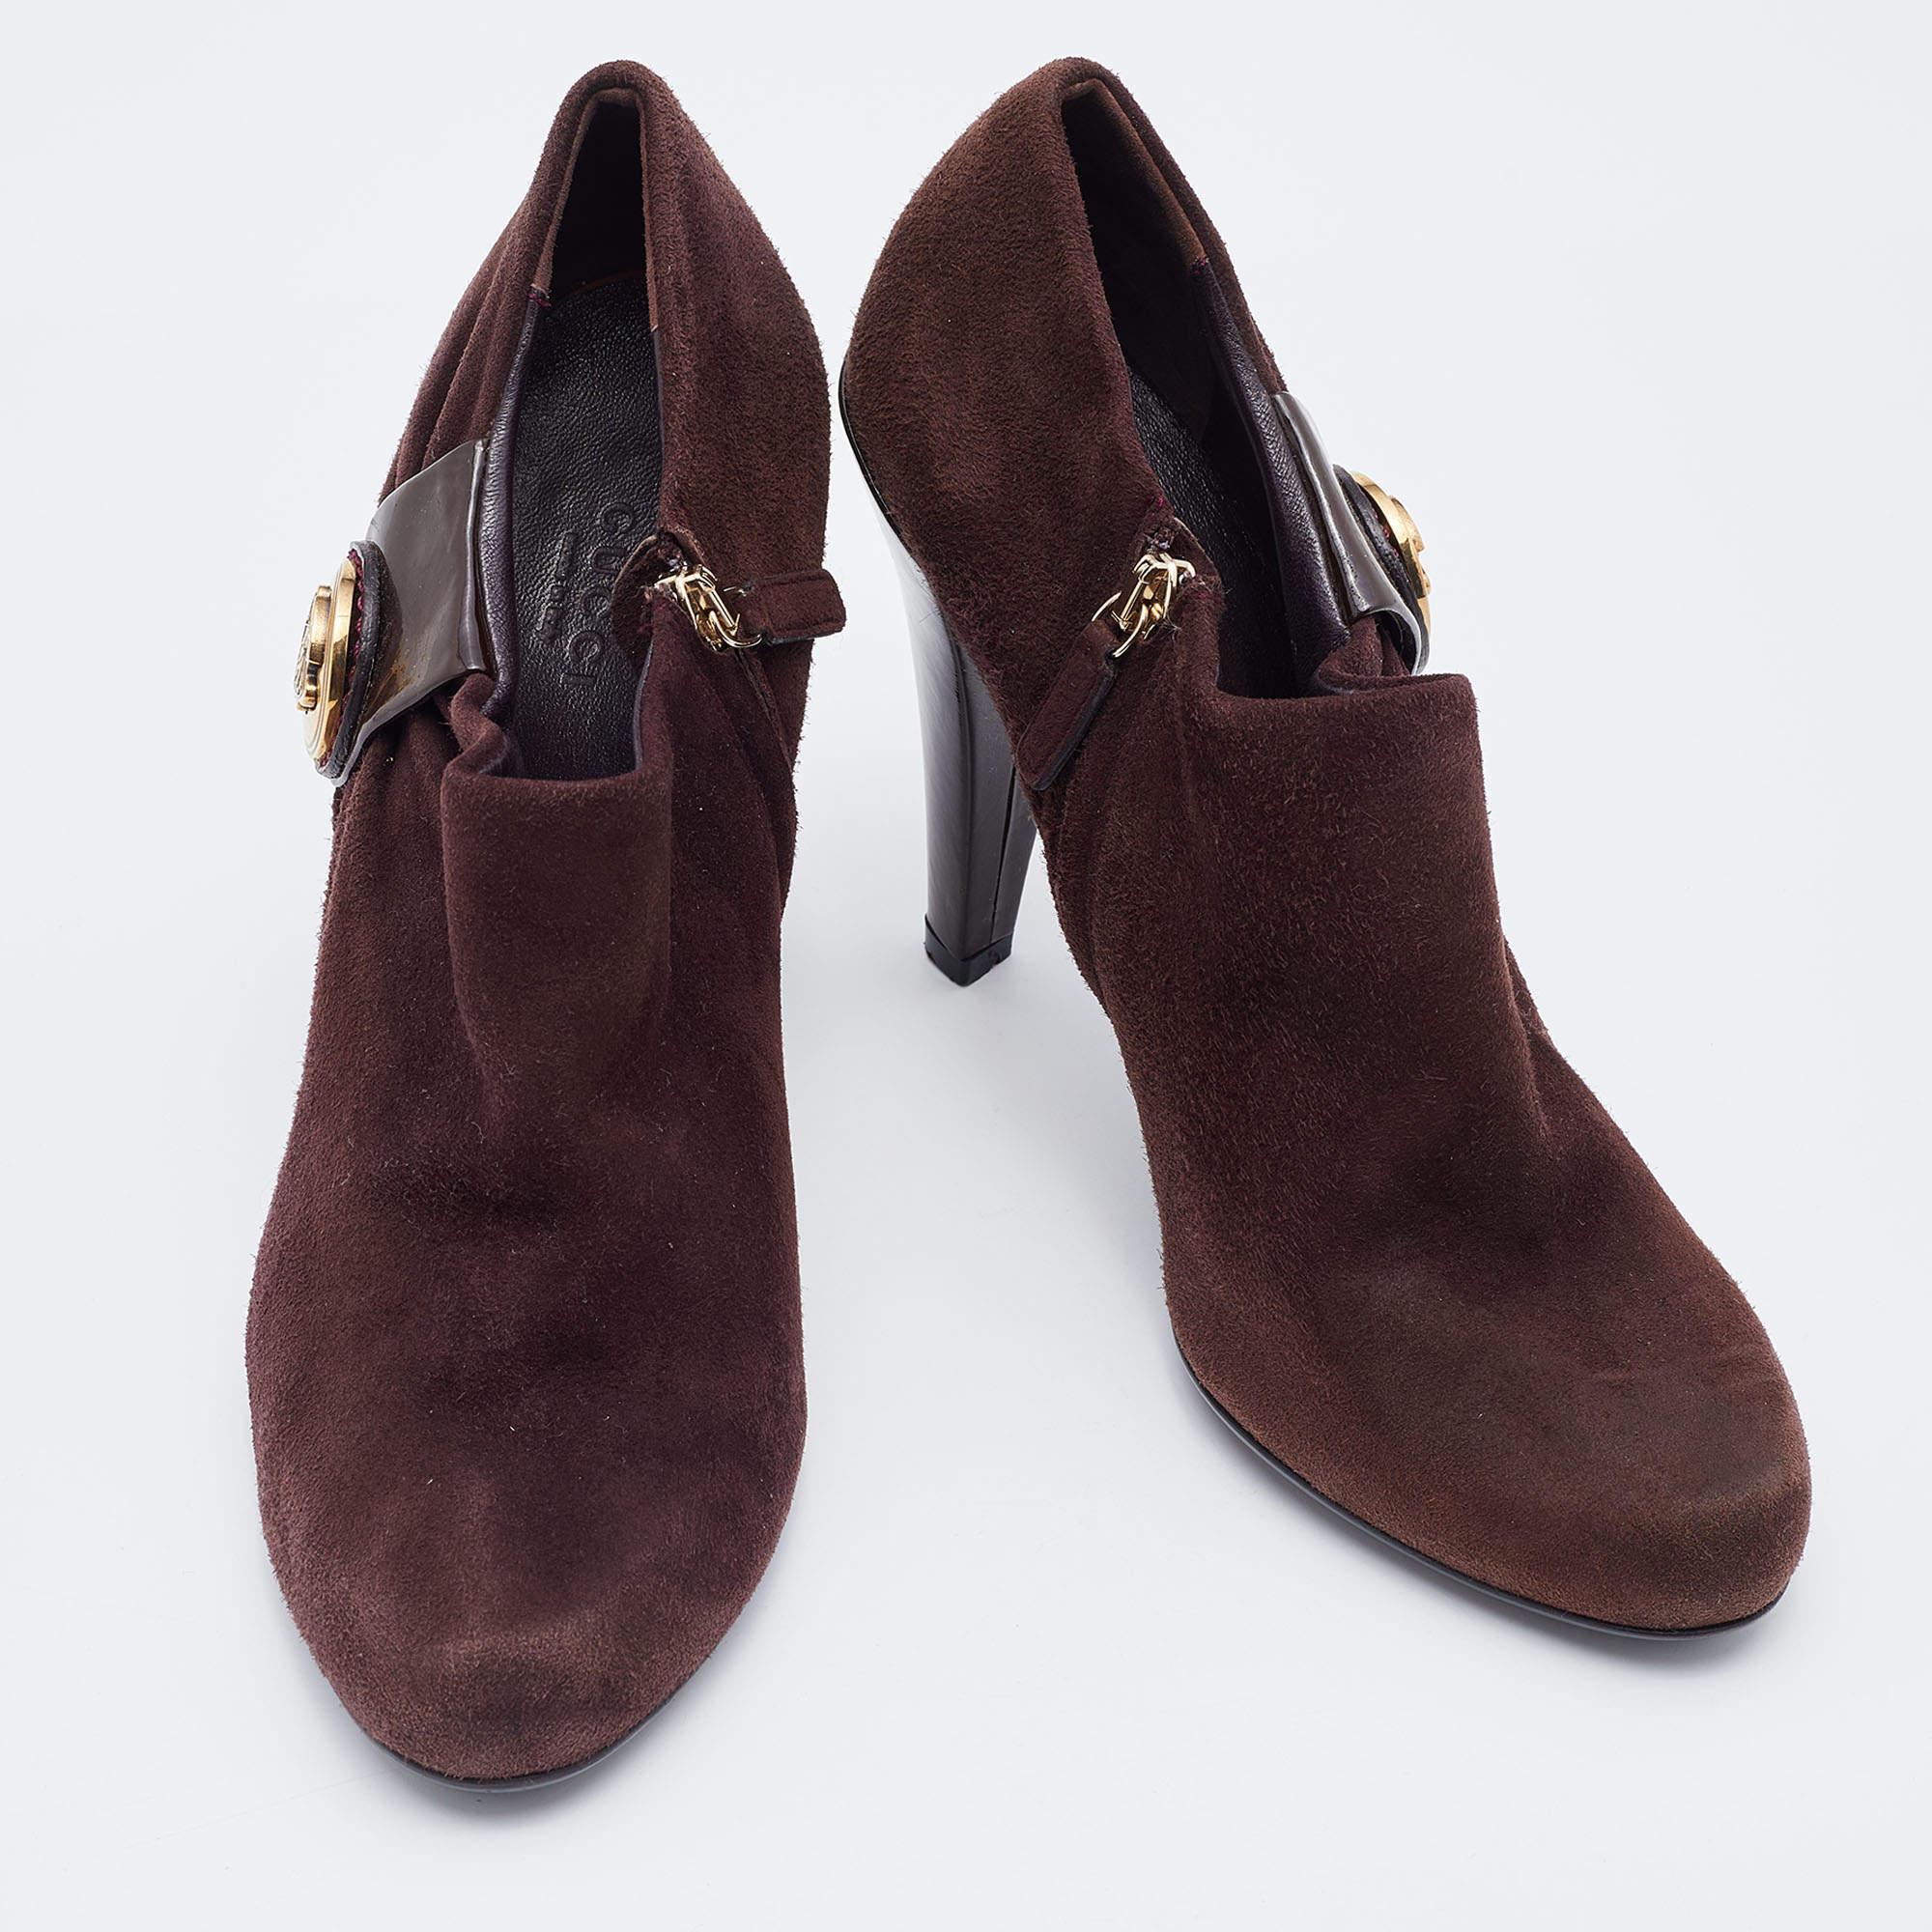 Give your look a classic Gucci finish with these chic brown Hysteria boots. This suede-made pair is accented with a polished gold Hysteria crest, 11cm heels and leather insoles.

